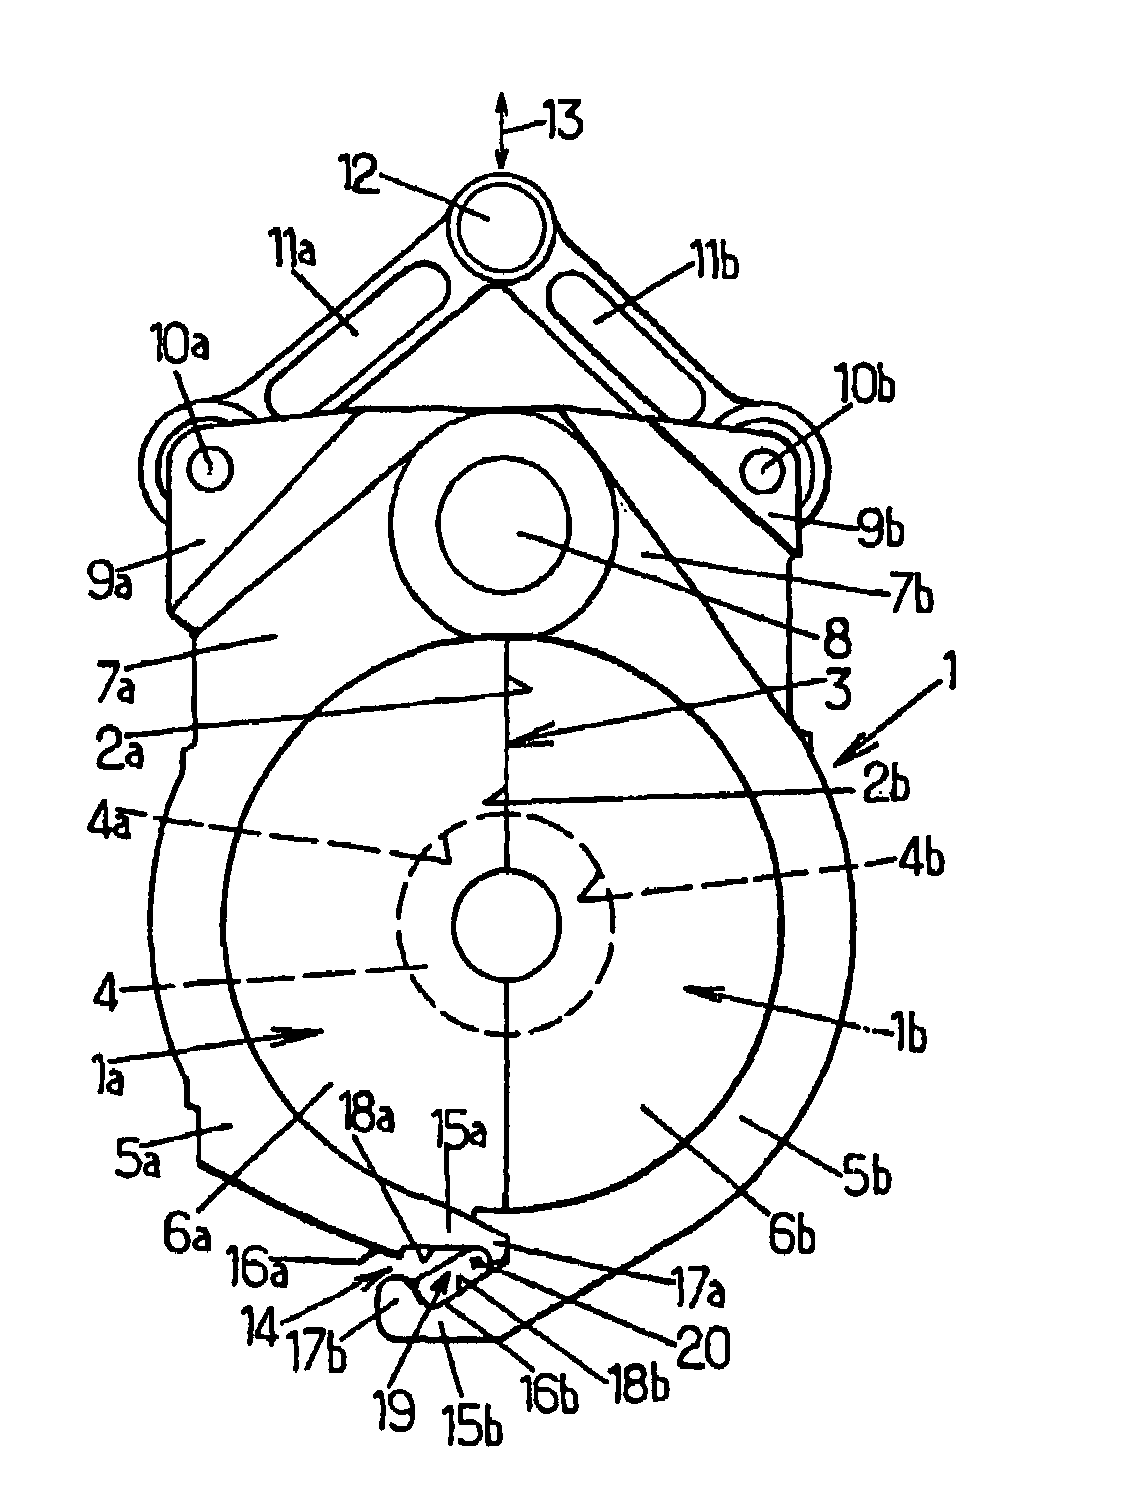 Molding device for producing thermoplastic containers